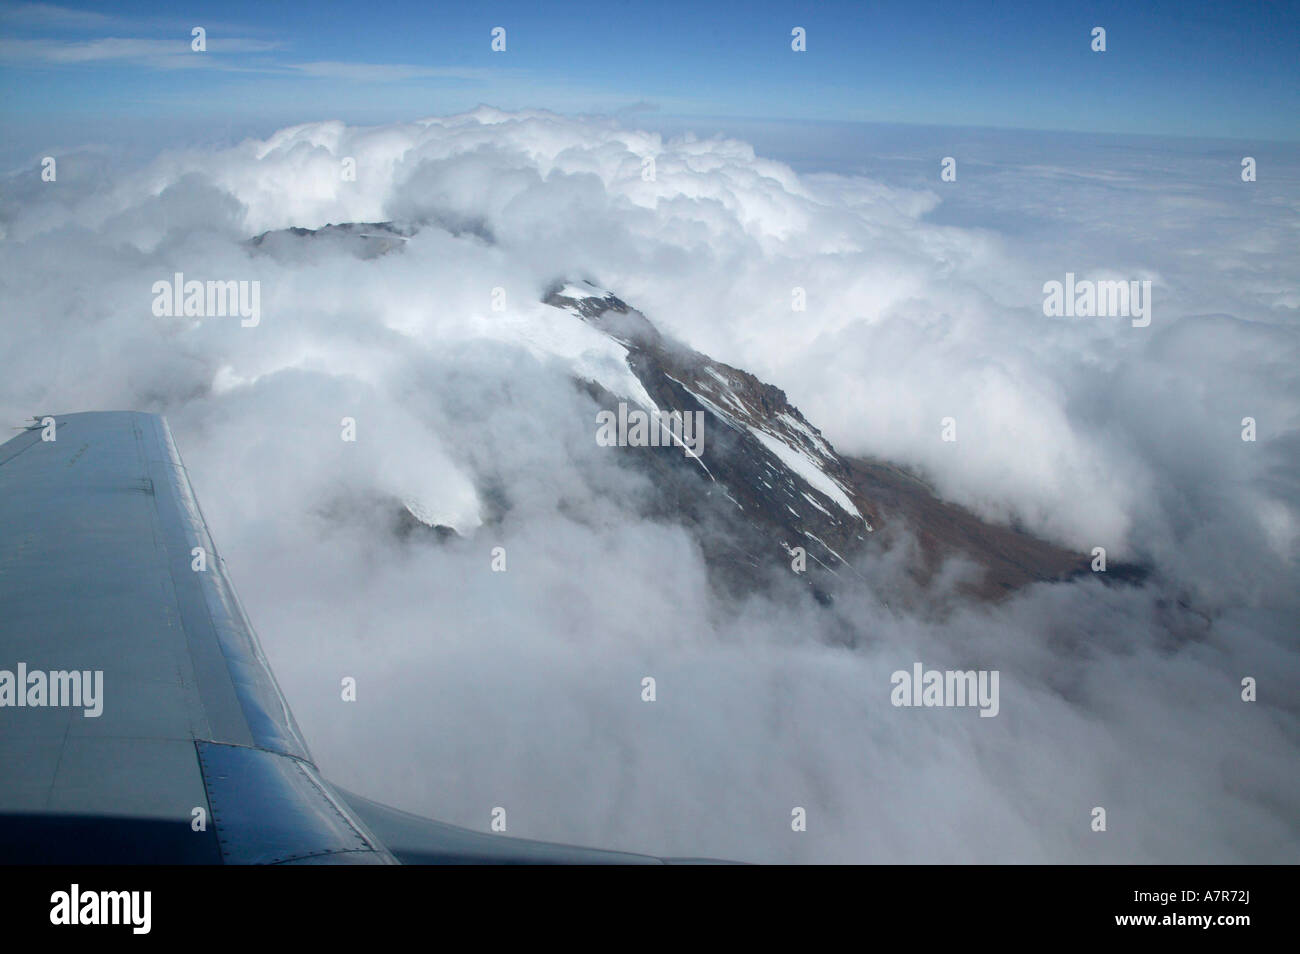 An aerial view of the snow capped peak of Mount Kilimanjaro Africa's tallest peak showing through the clouds Stock Photo